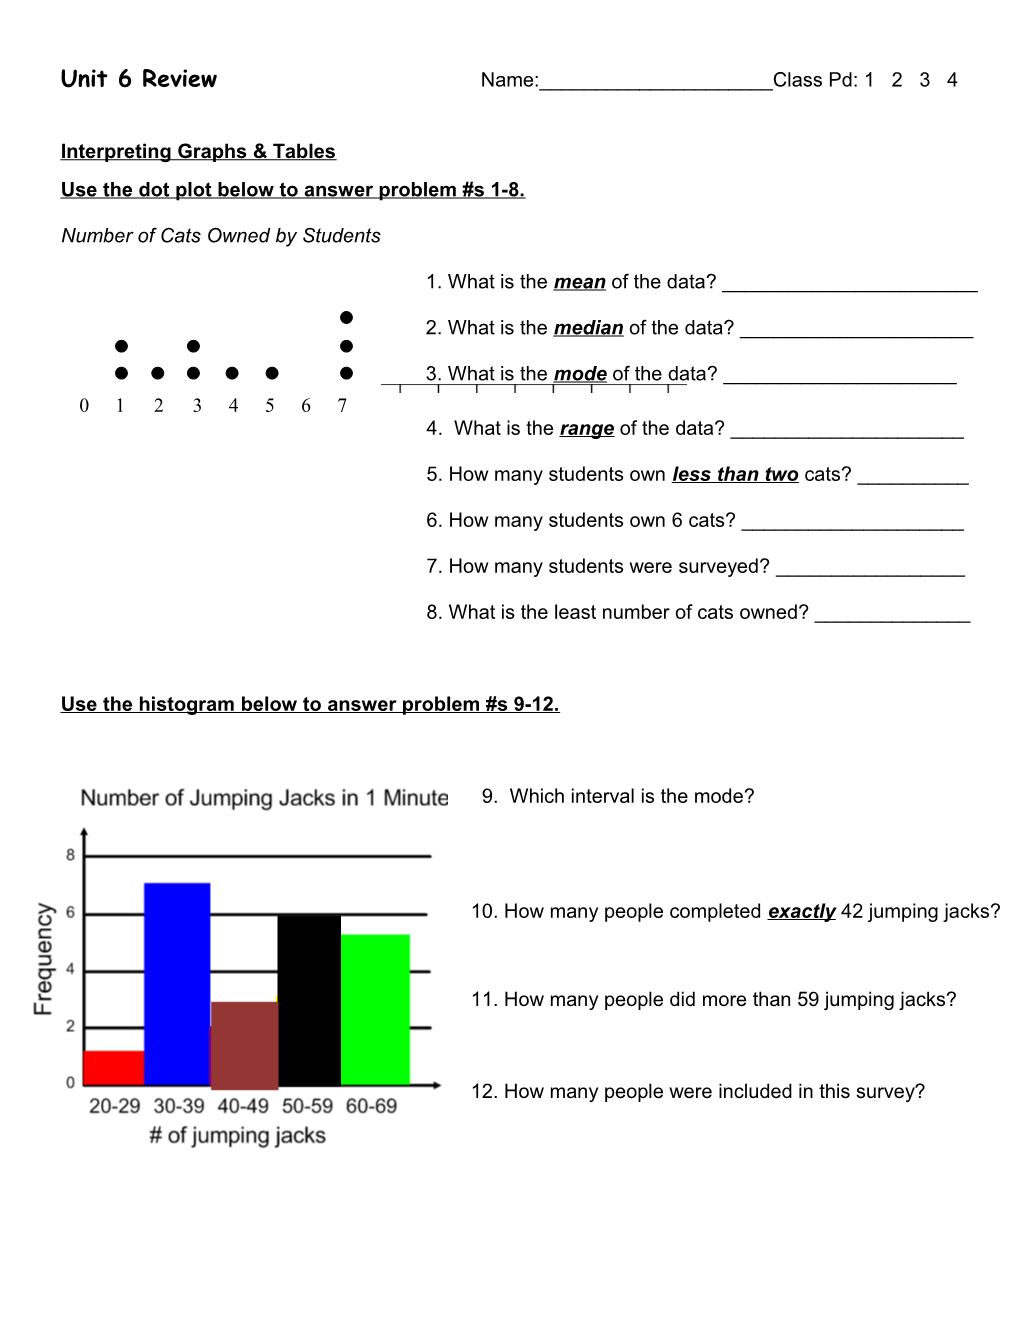 Use the Dot Plot Below to Answer Problem #S 1-8